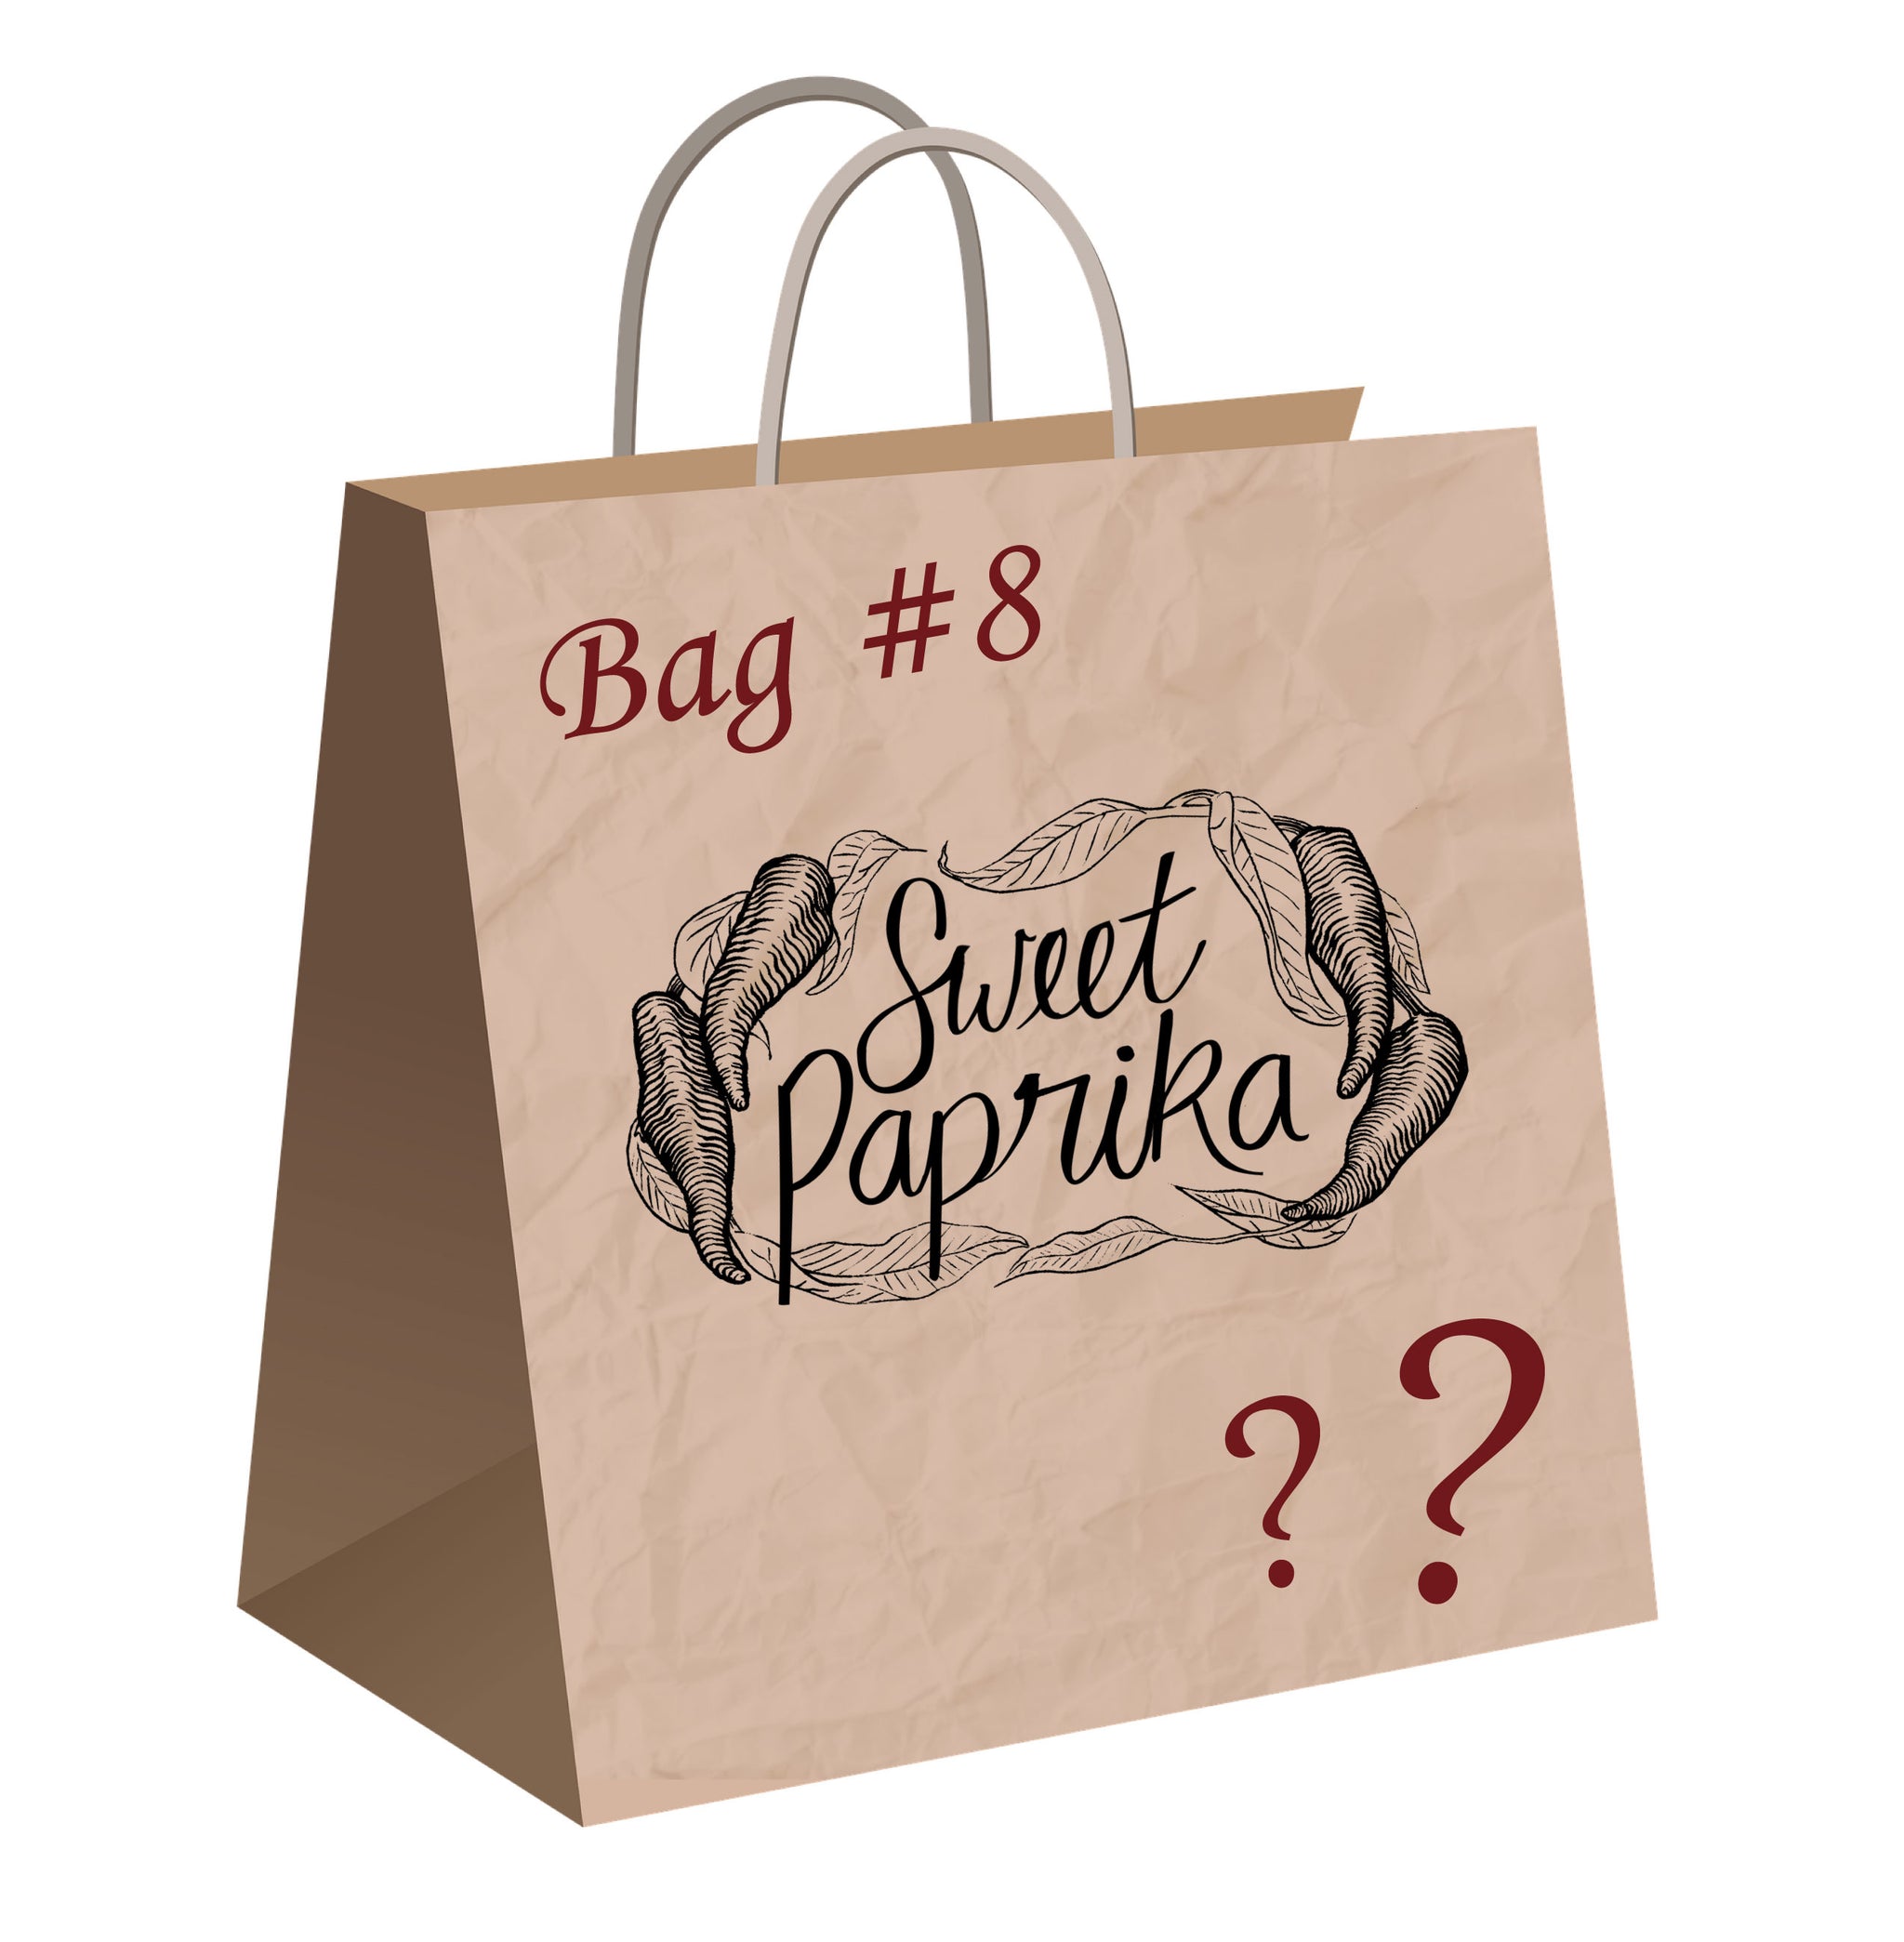 Mystery Bag #8: Rustic Warmth